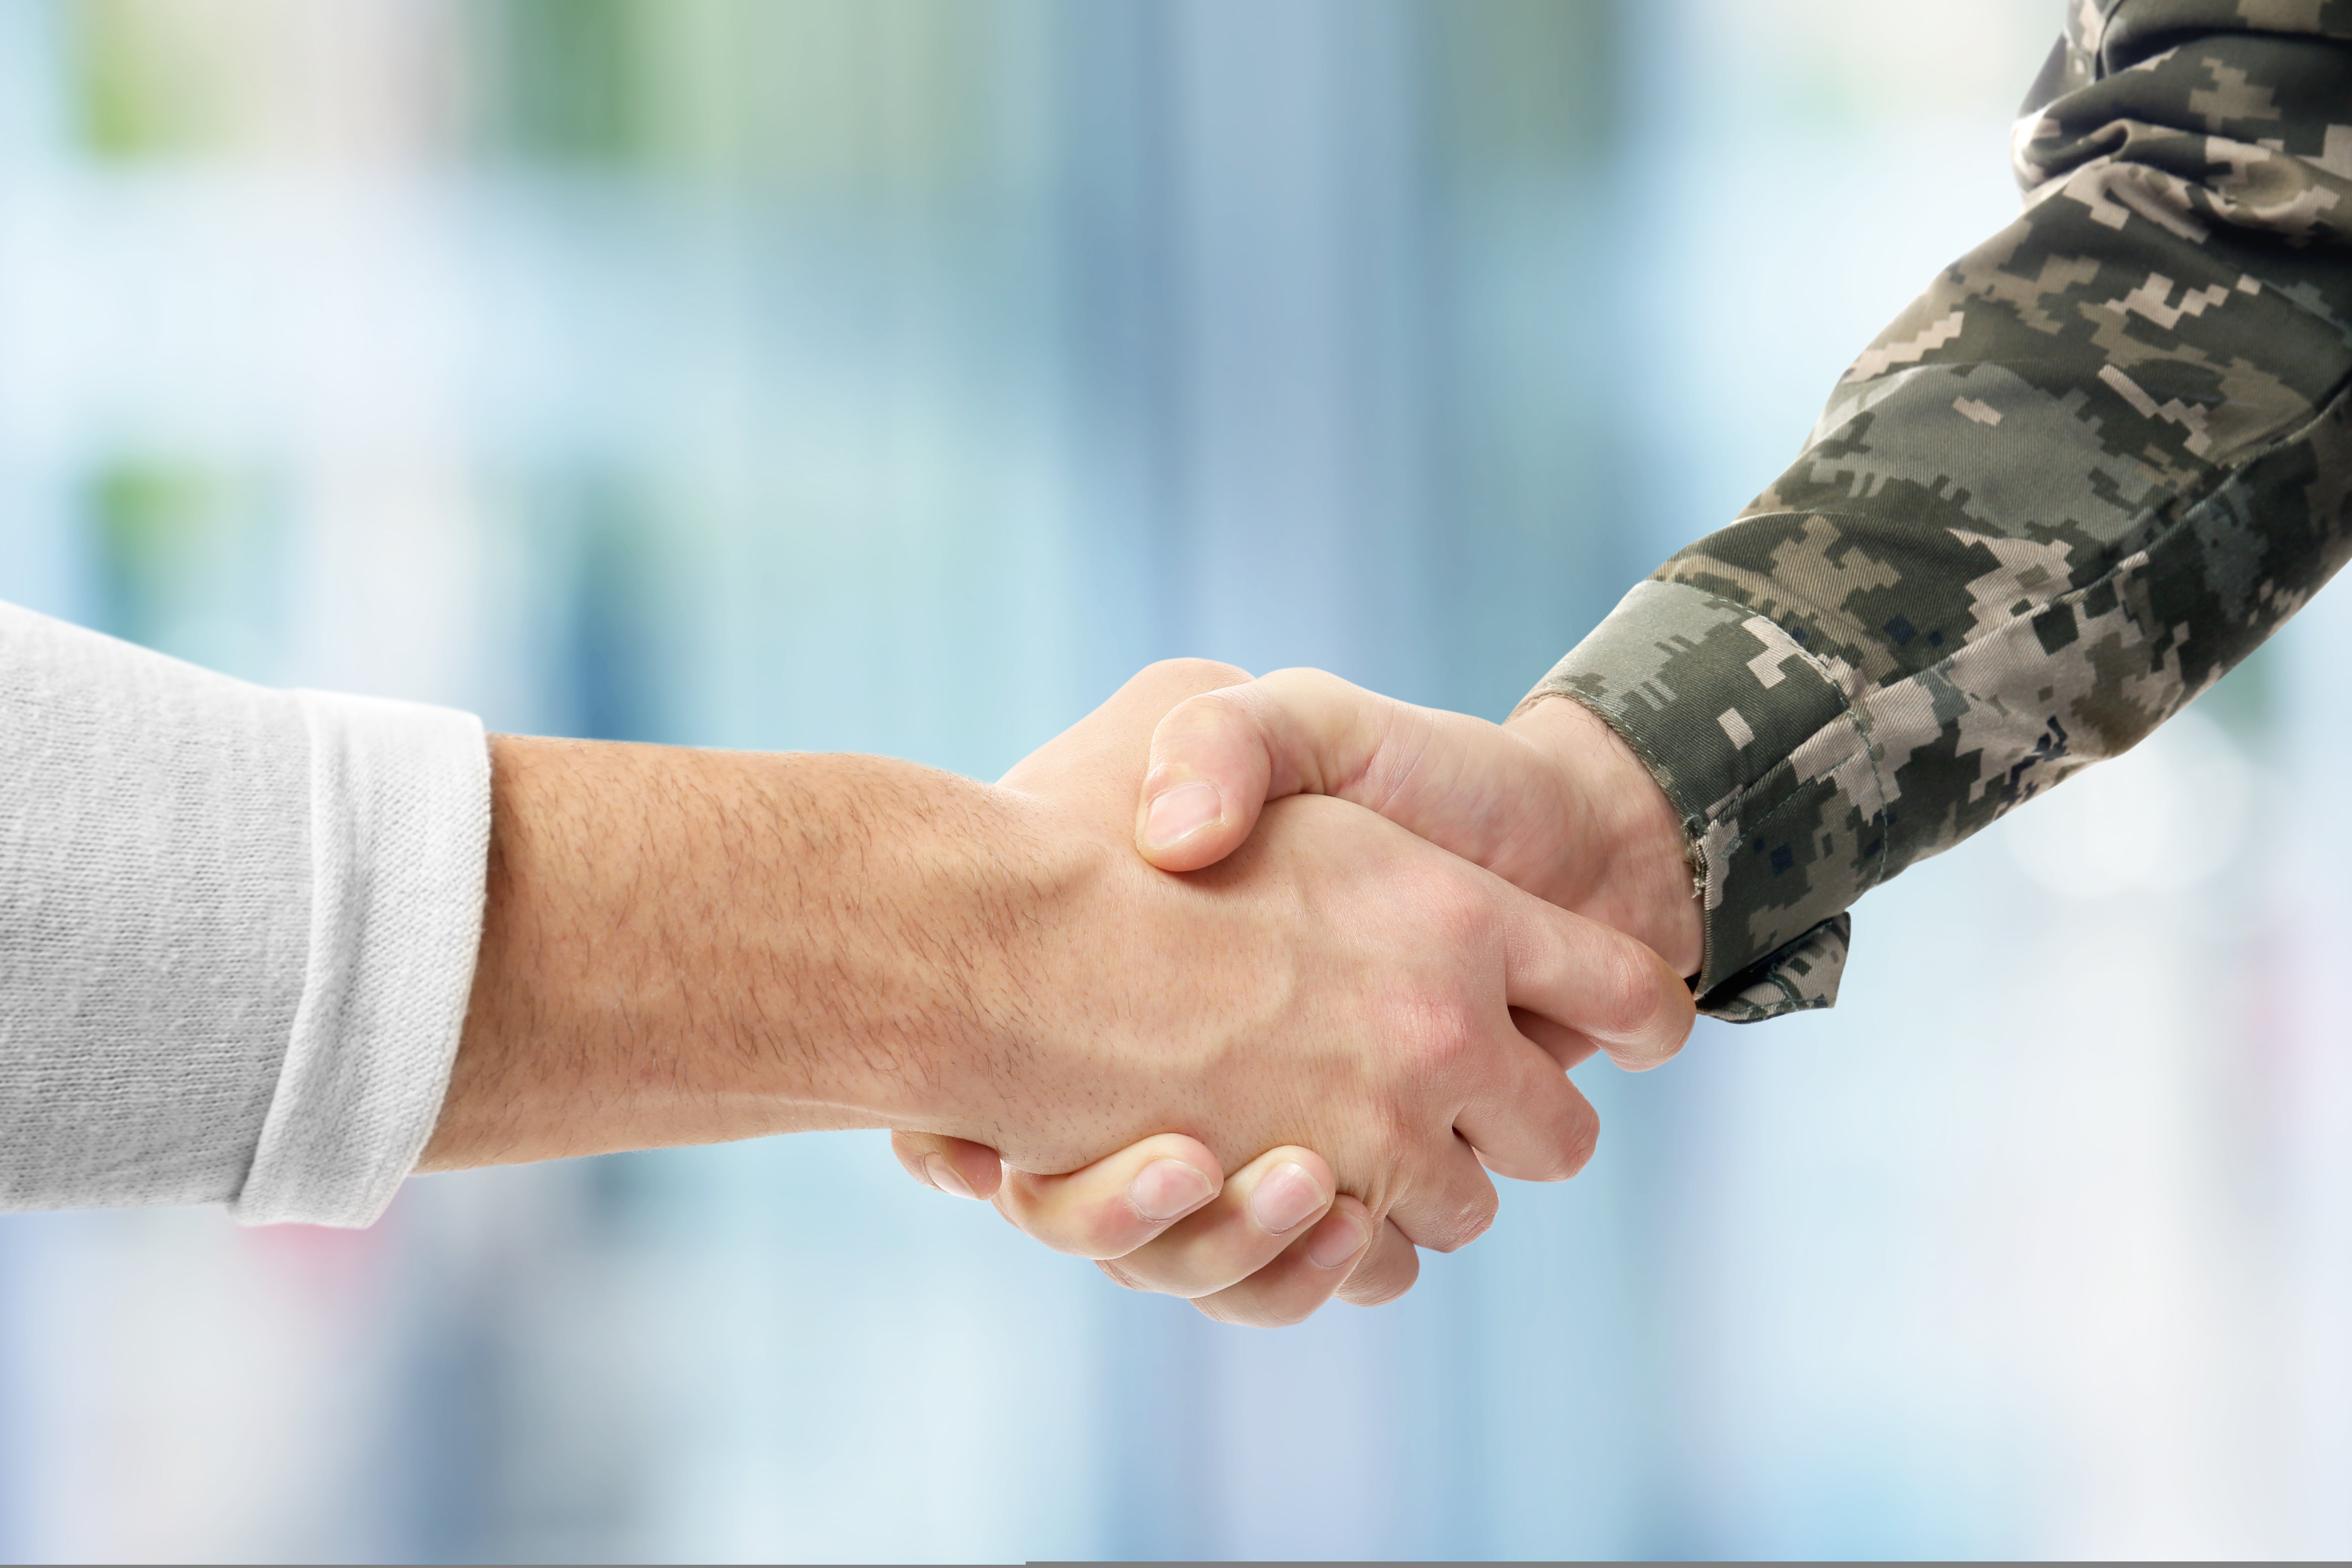 Soldier,And,Civilian,Shaking,Hands,On,Blurred,Background